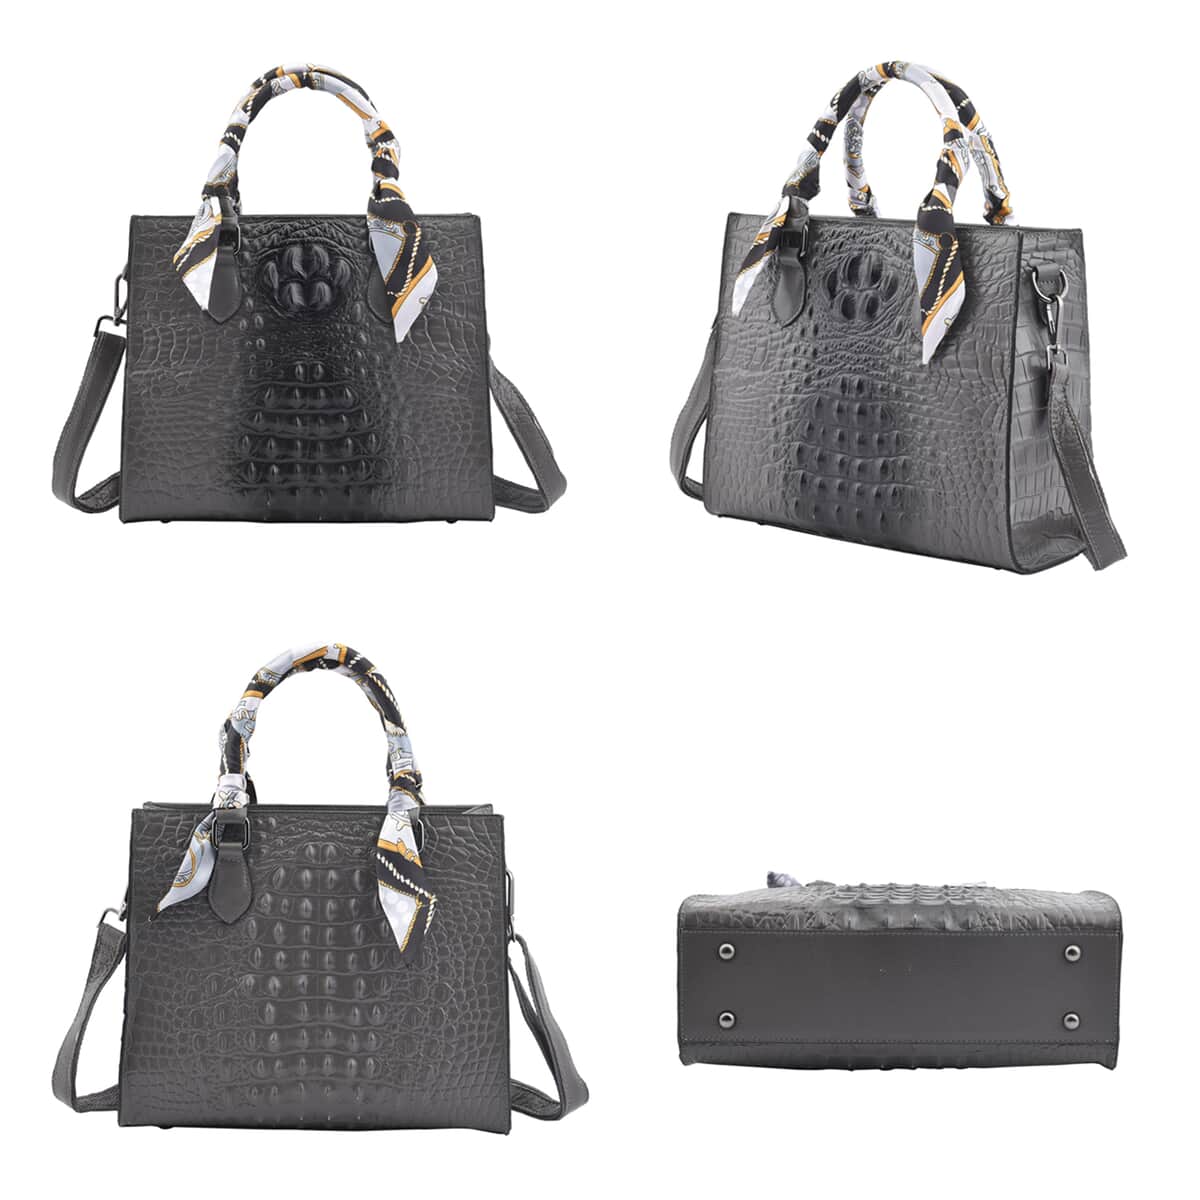 Black Croc-Embossed Genuine Leather Convertible Bag (11"x4"x9.5") with Handle Drop and Shoulder Strap image number 1